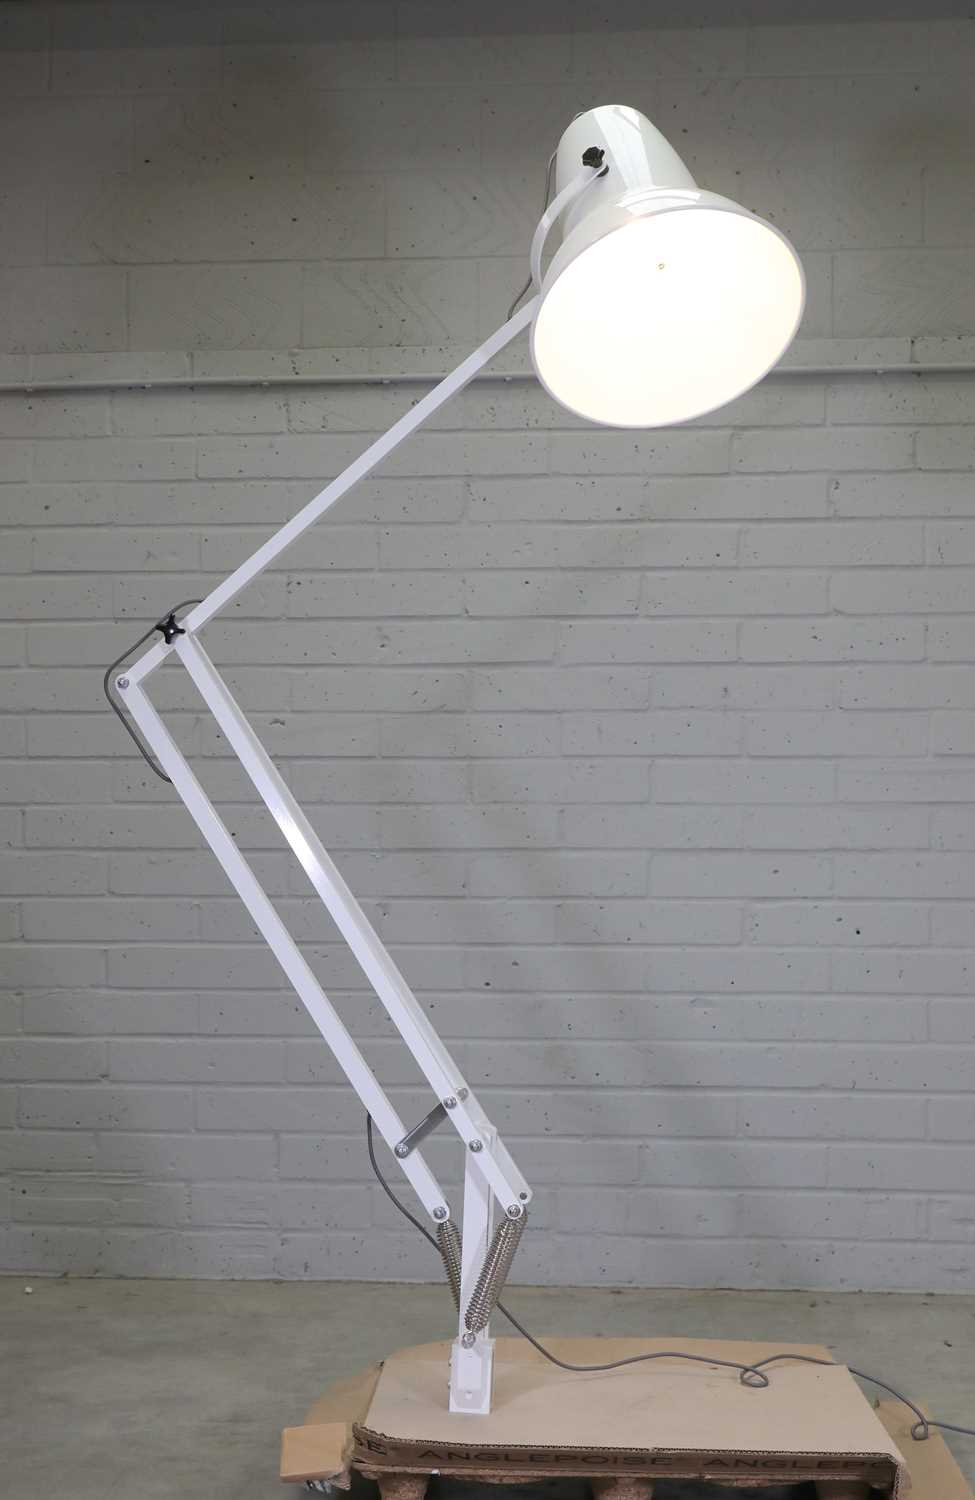 A giant Anglepoise 'Model No. 1227' wall-mounted lamp, - Image 2 of 2